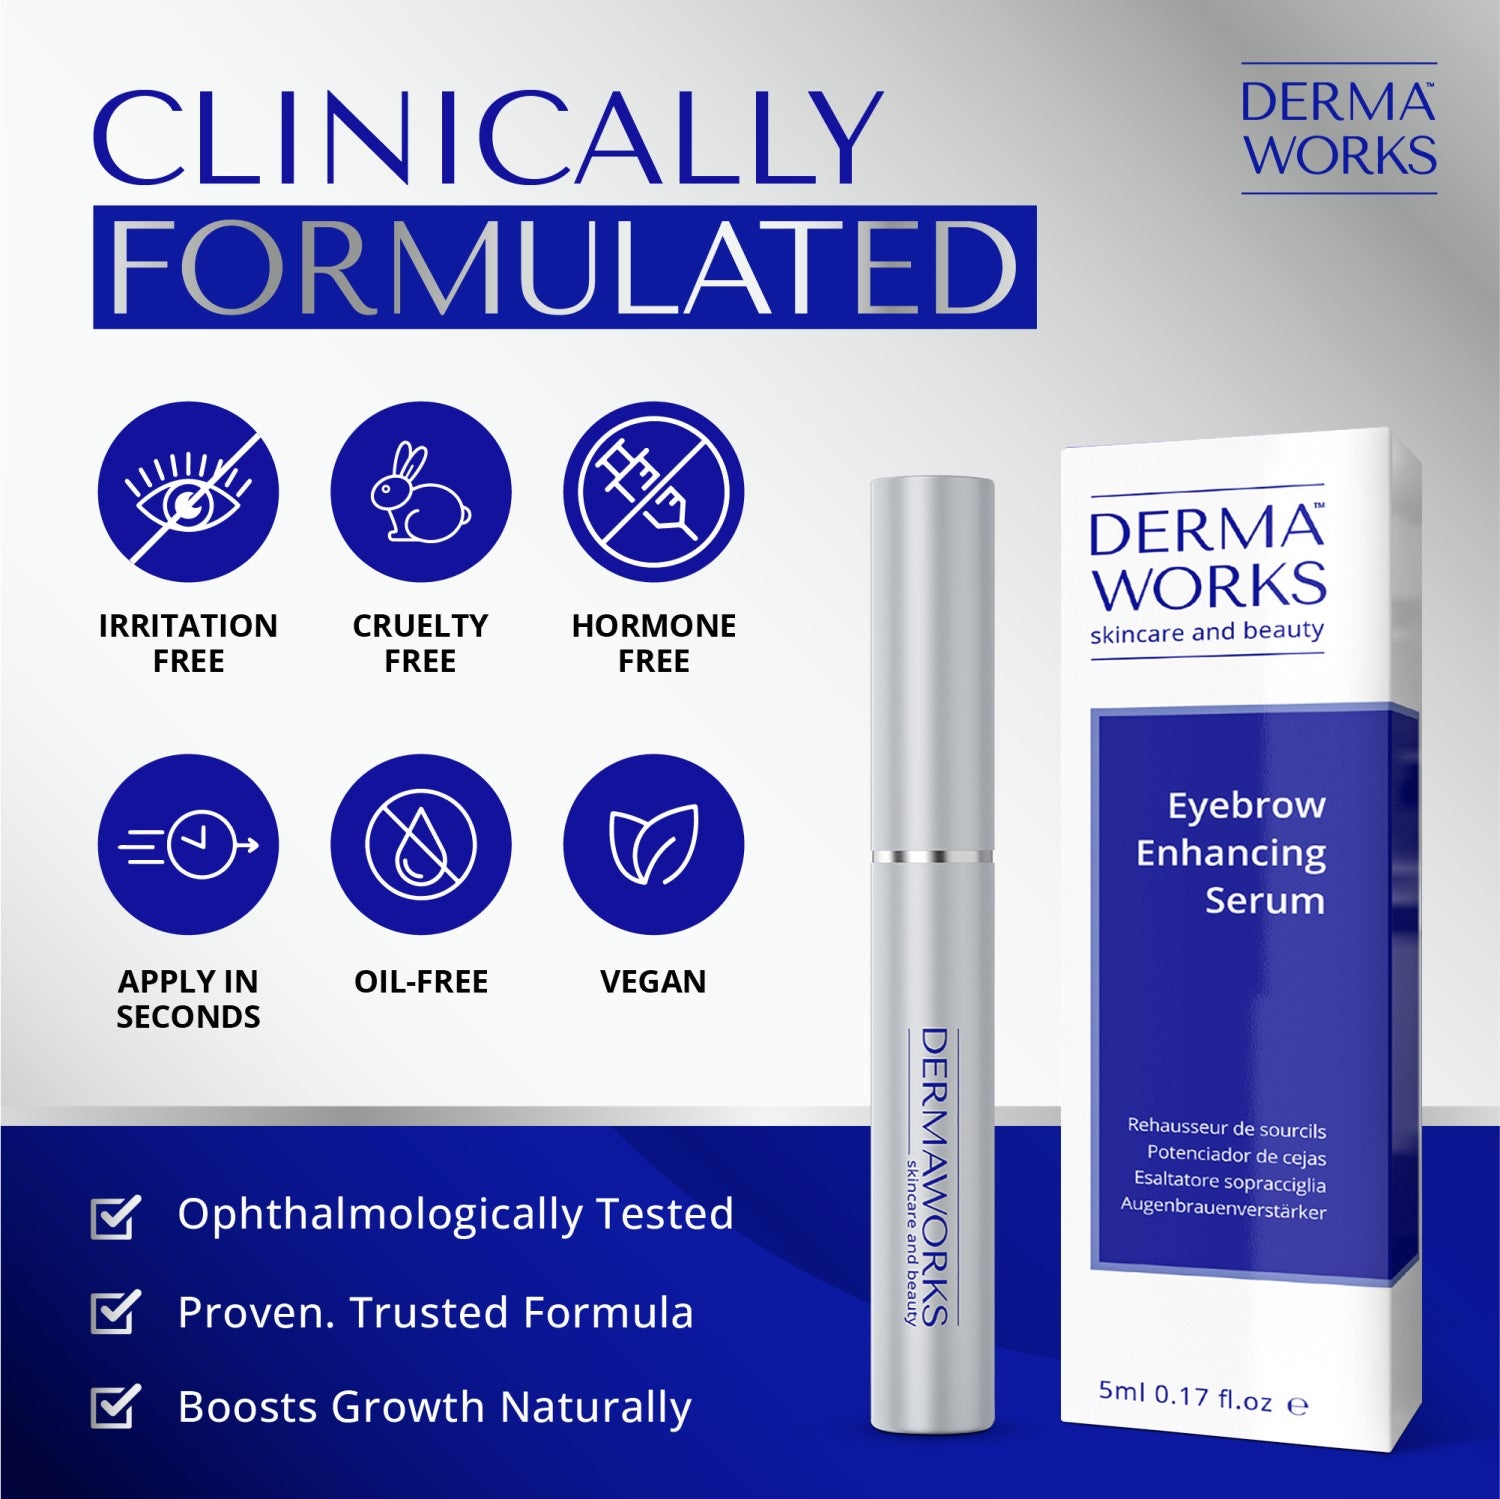 Dermaworks rapid brow serum is proven and trusted to help you grow fuller and thicker eyebrows, naturally in just 60 days.